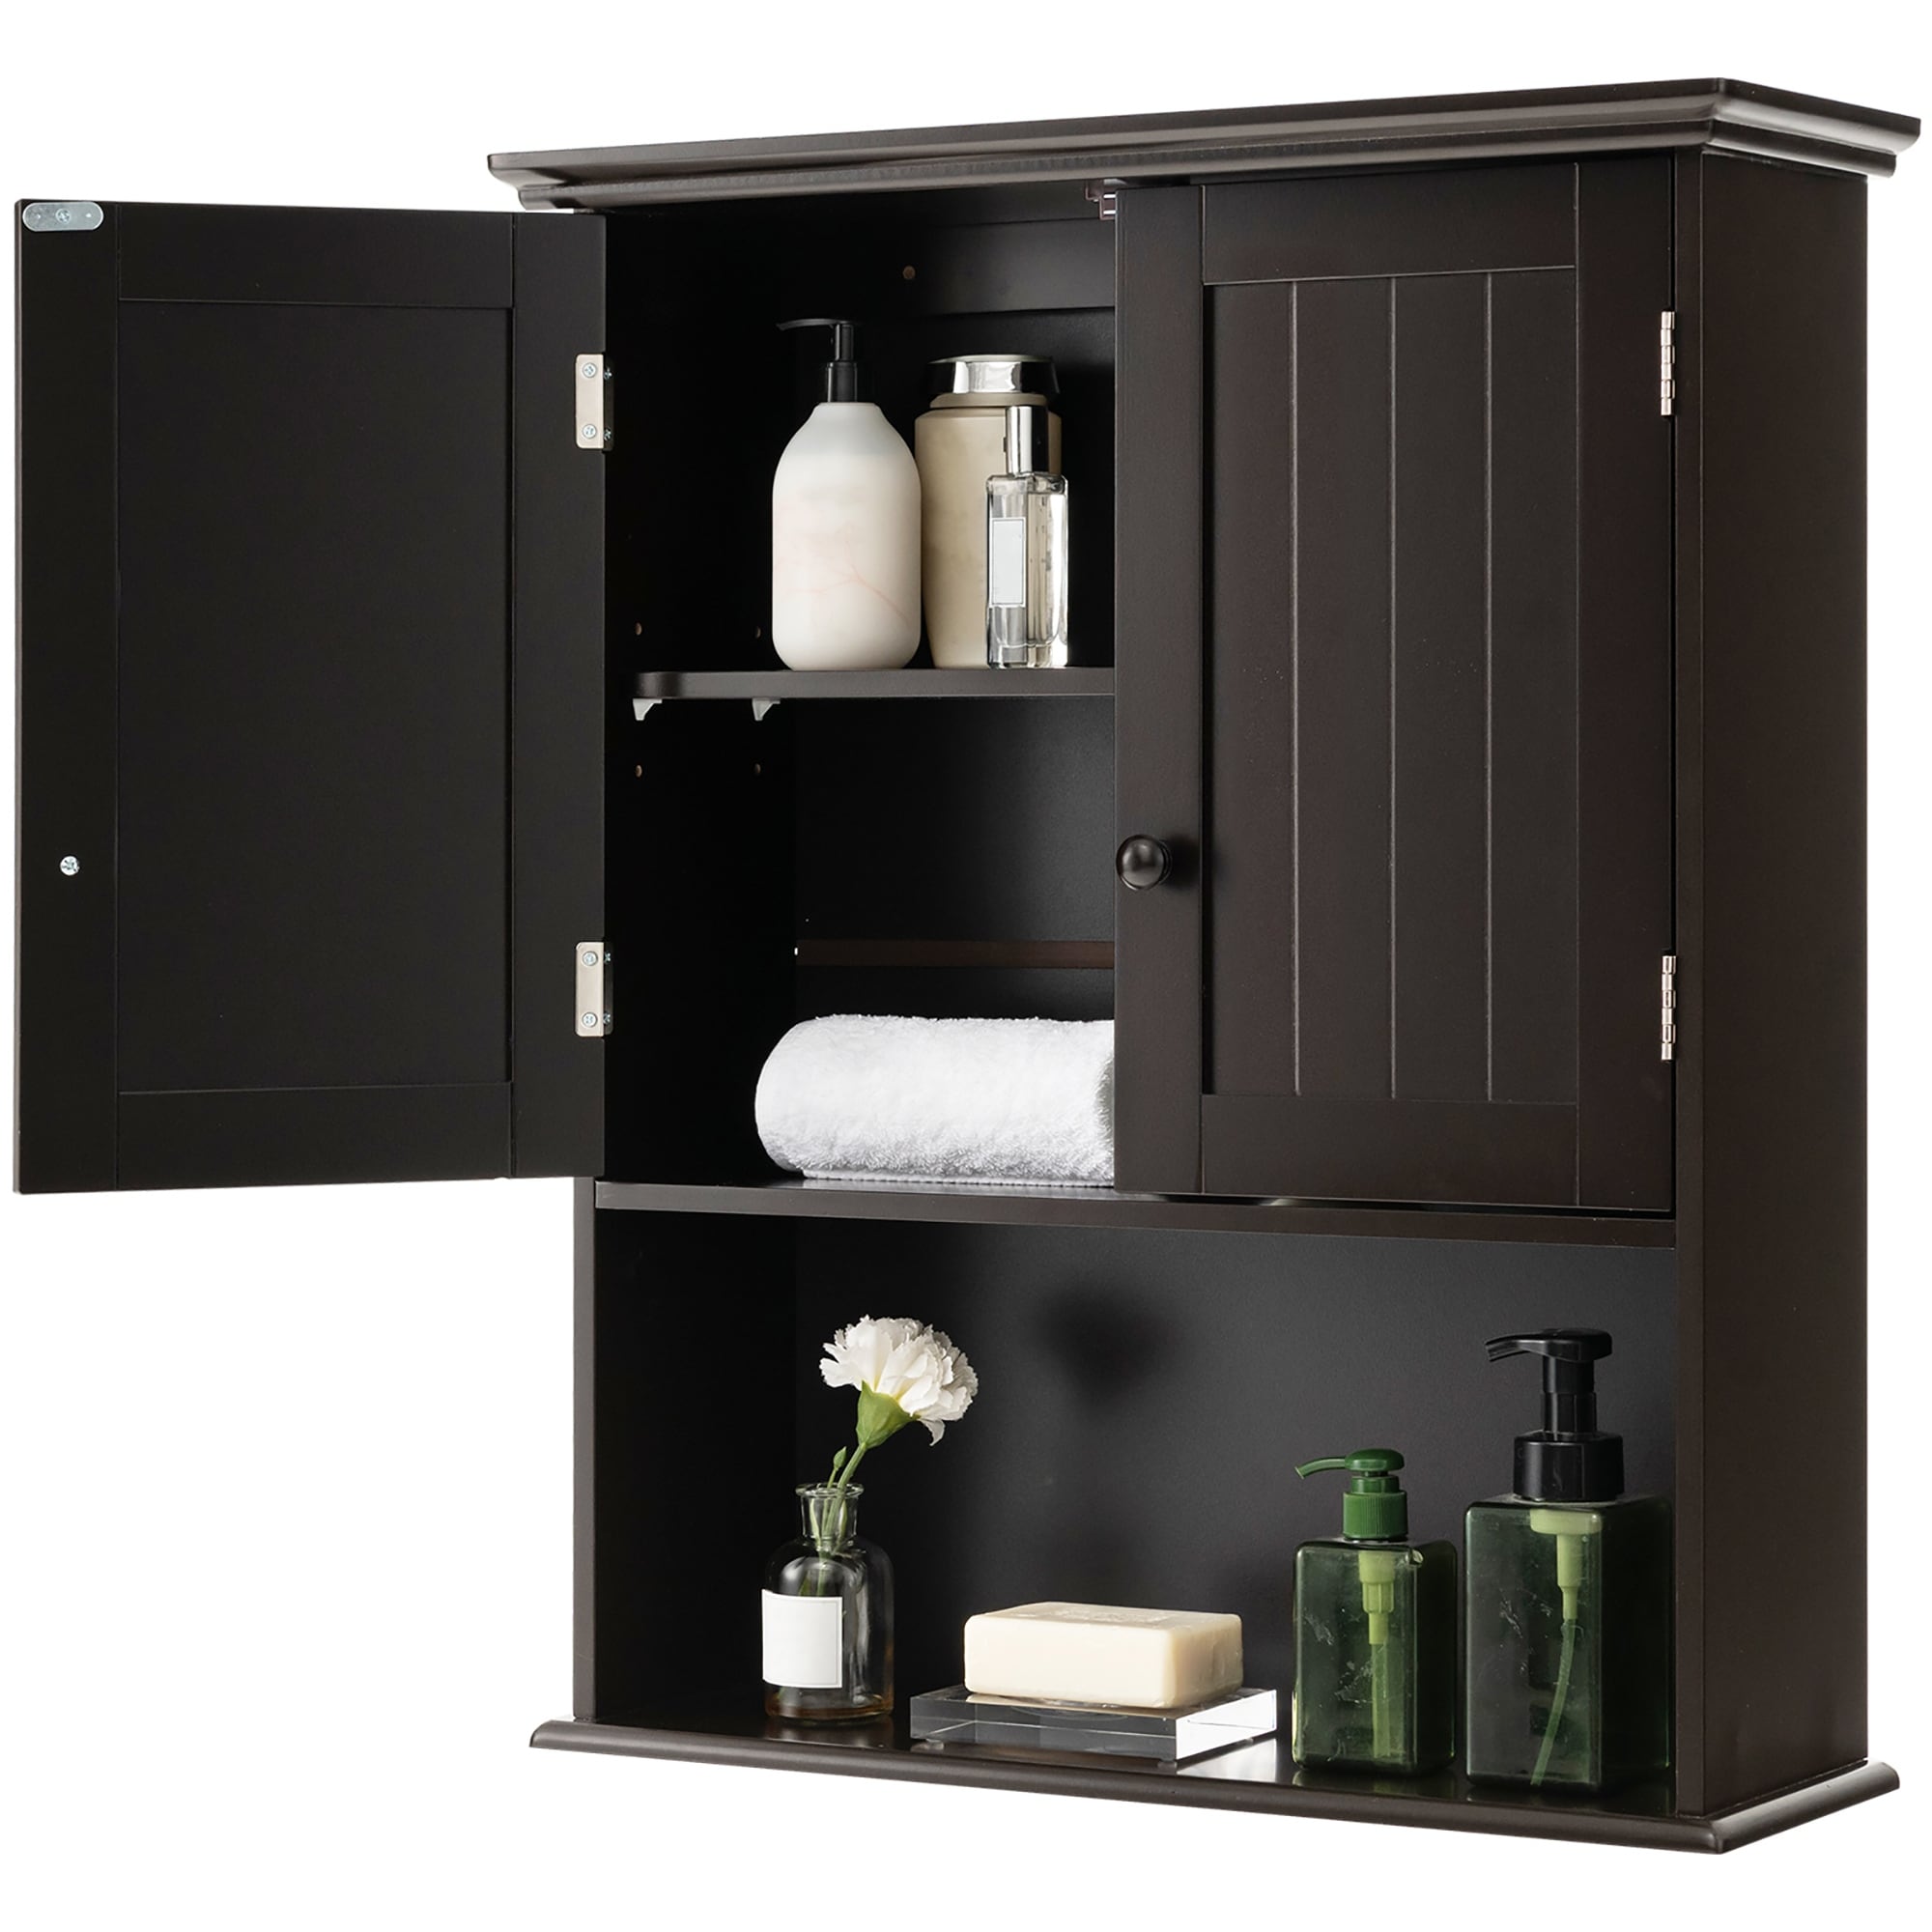 https://ak1.ostkcdn.com/images/products/is/images/direct/b429858c4393fd492f4a0163059f78b3e259bc8b/Costway-Wall-Mount-Bathroom-Cabinet-Wooden-Medicine-Cabinet-Storage.jpg